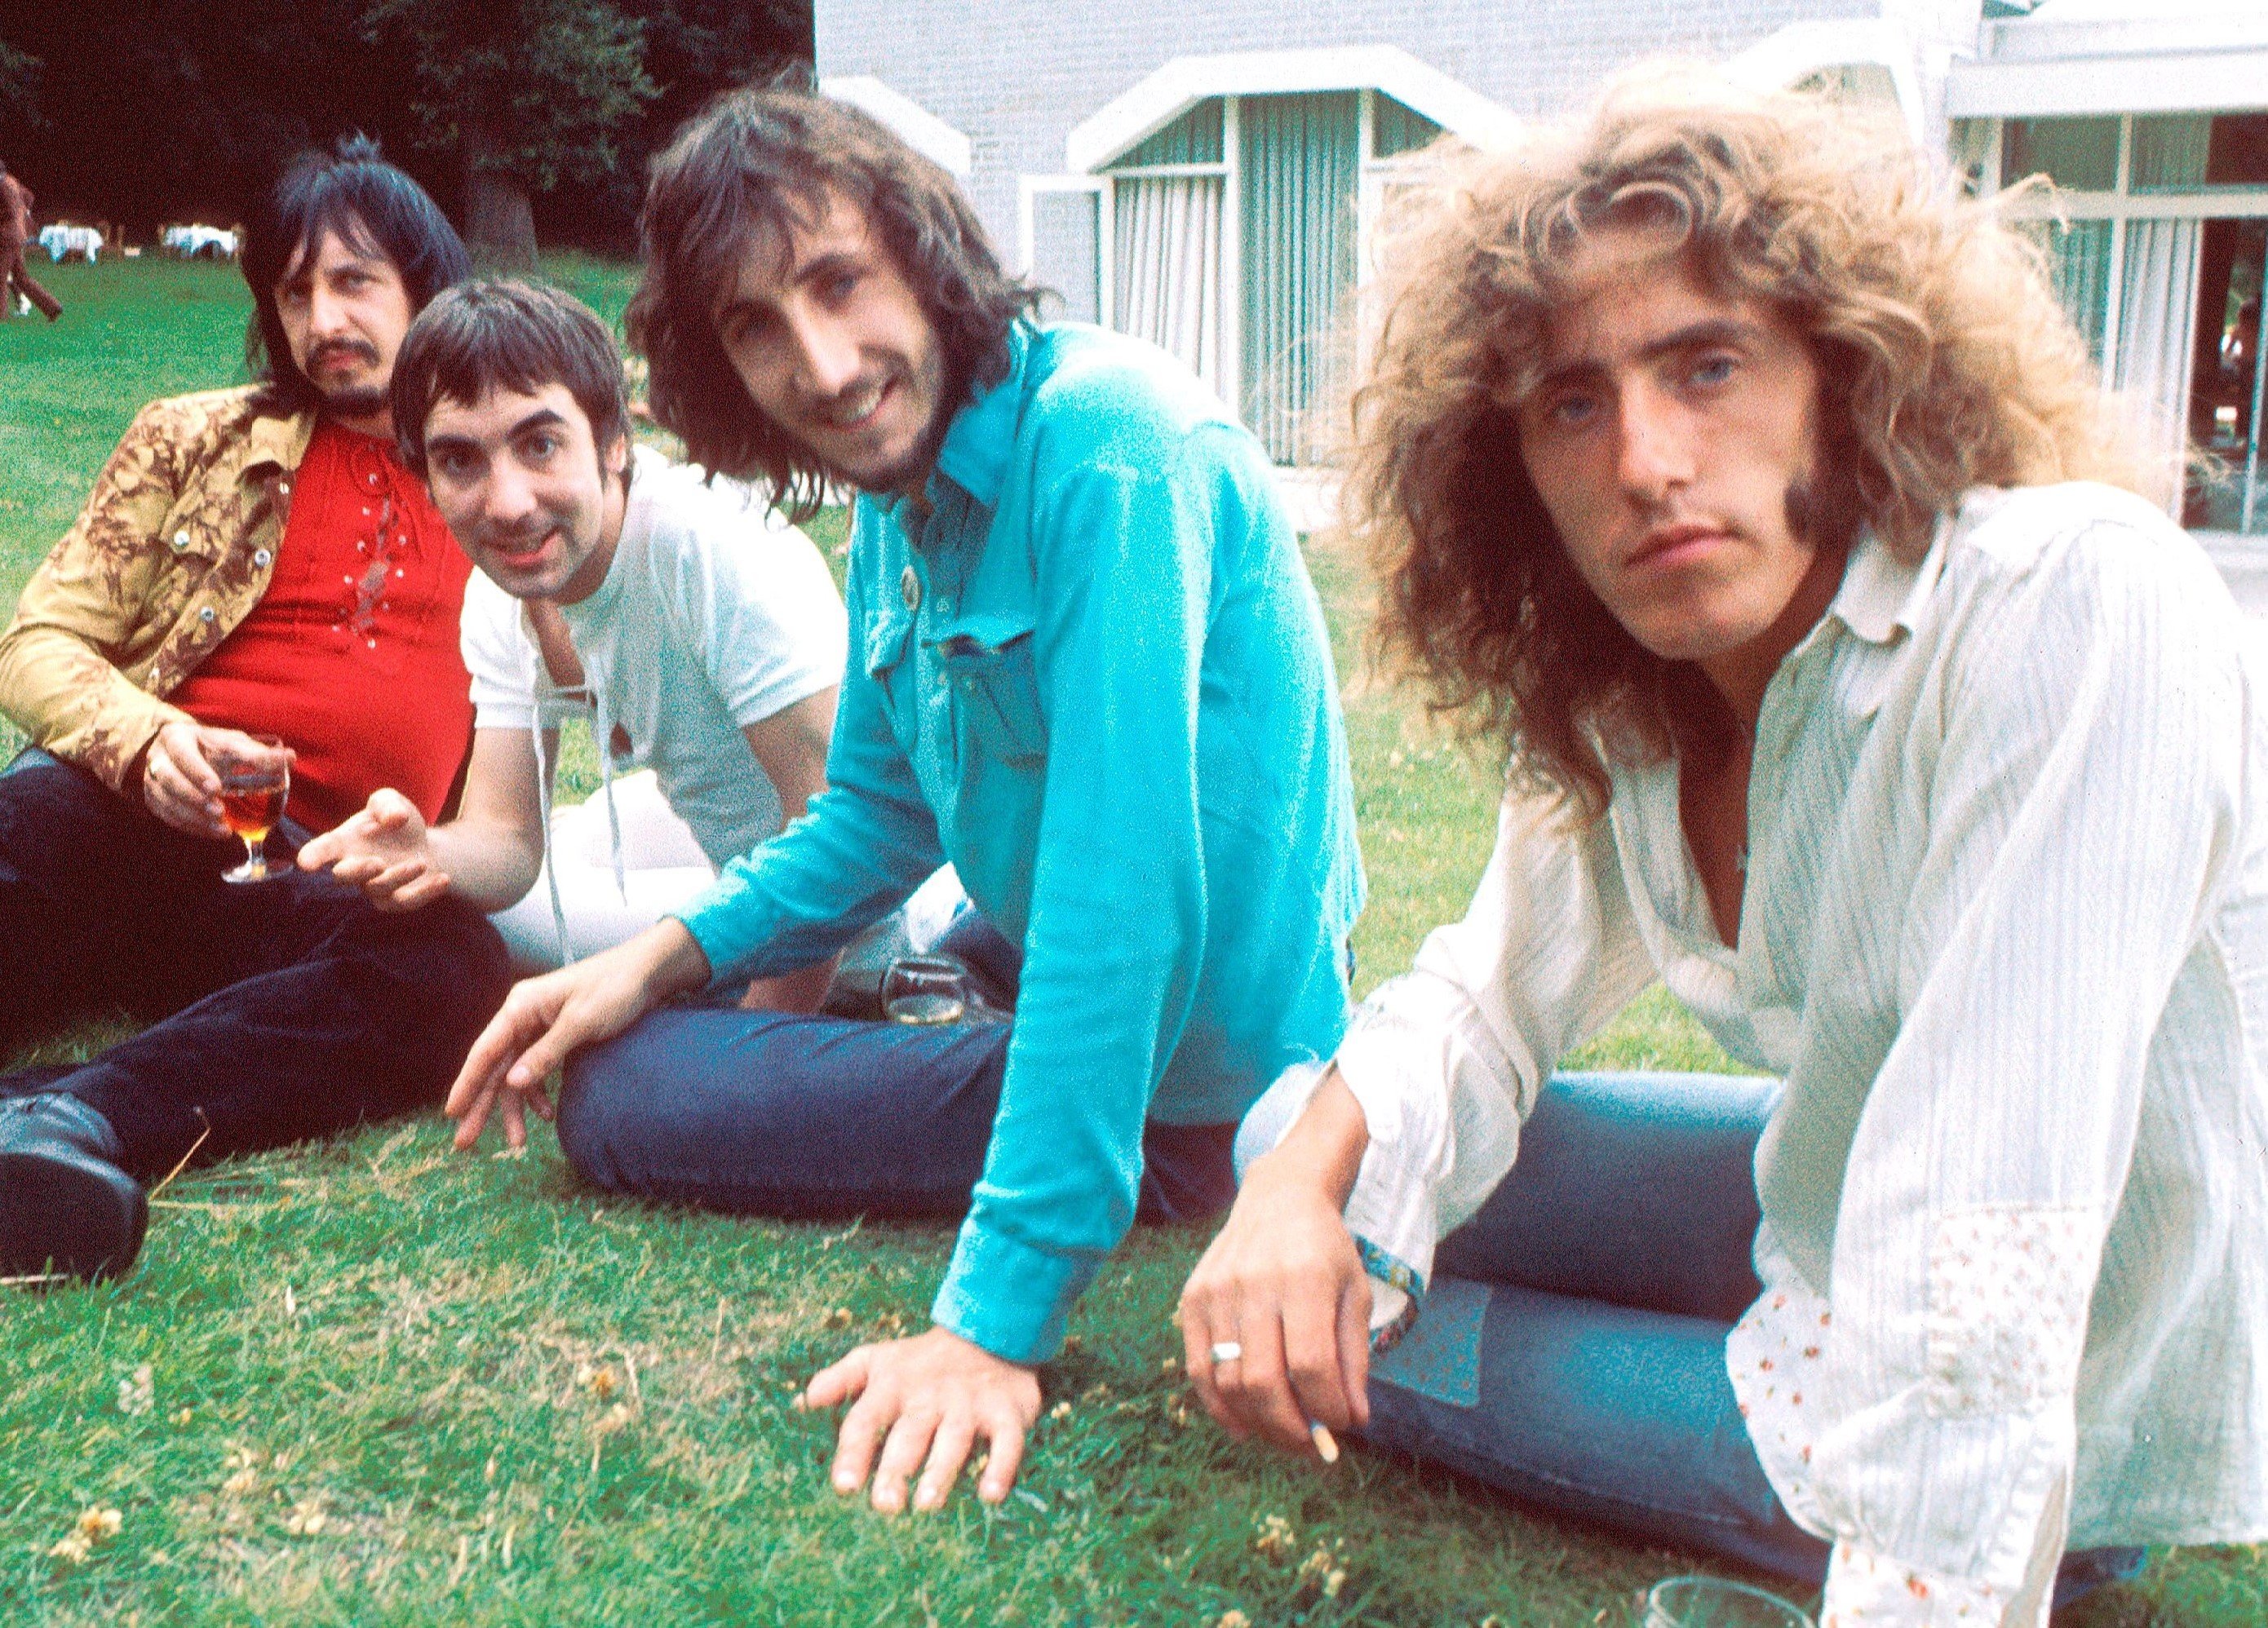 The Who’s ‘Pinball Wizard’ Was Inspired by a Man Who Said He Was God